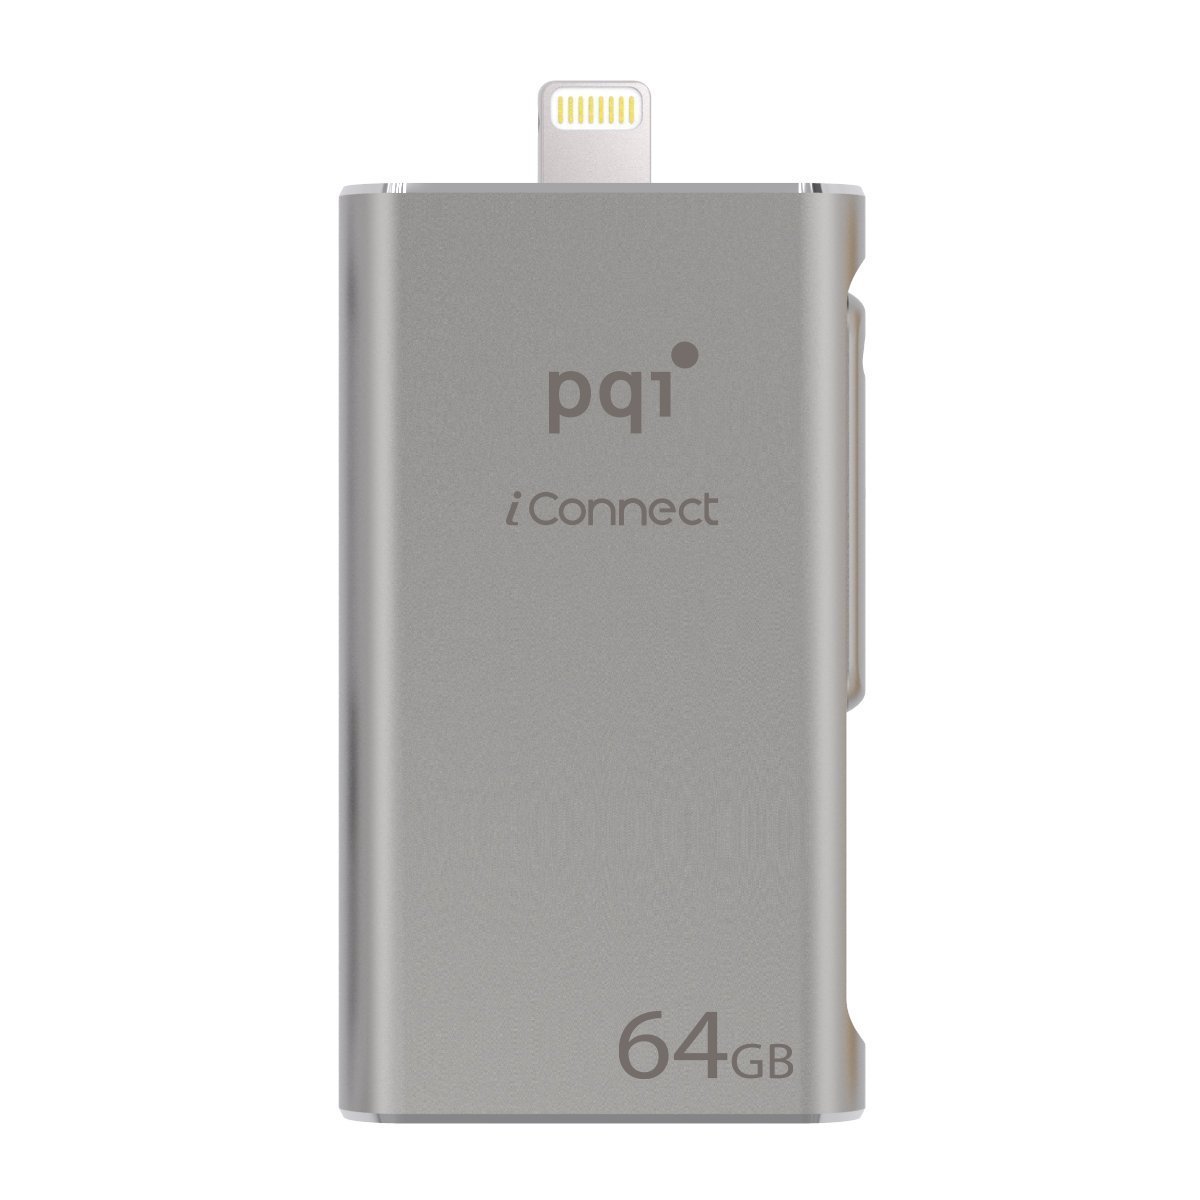 Picture of PQI 6I01-064GR2001 iConnect Apple MFi 64 GB Mobile Flash Drive with Lightning Connector for iPhones, iPads, iPod, Mac & PC USB 3.0 - Iron Gray